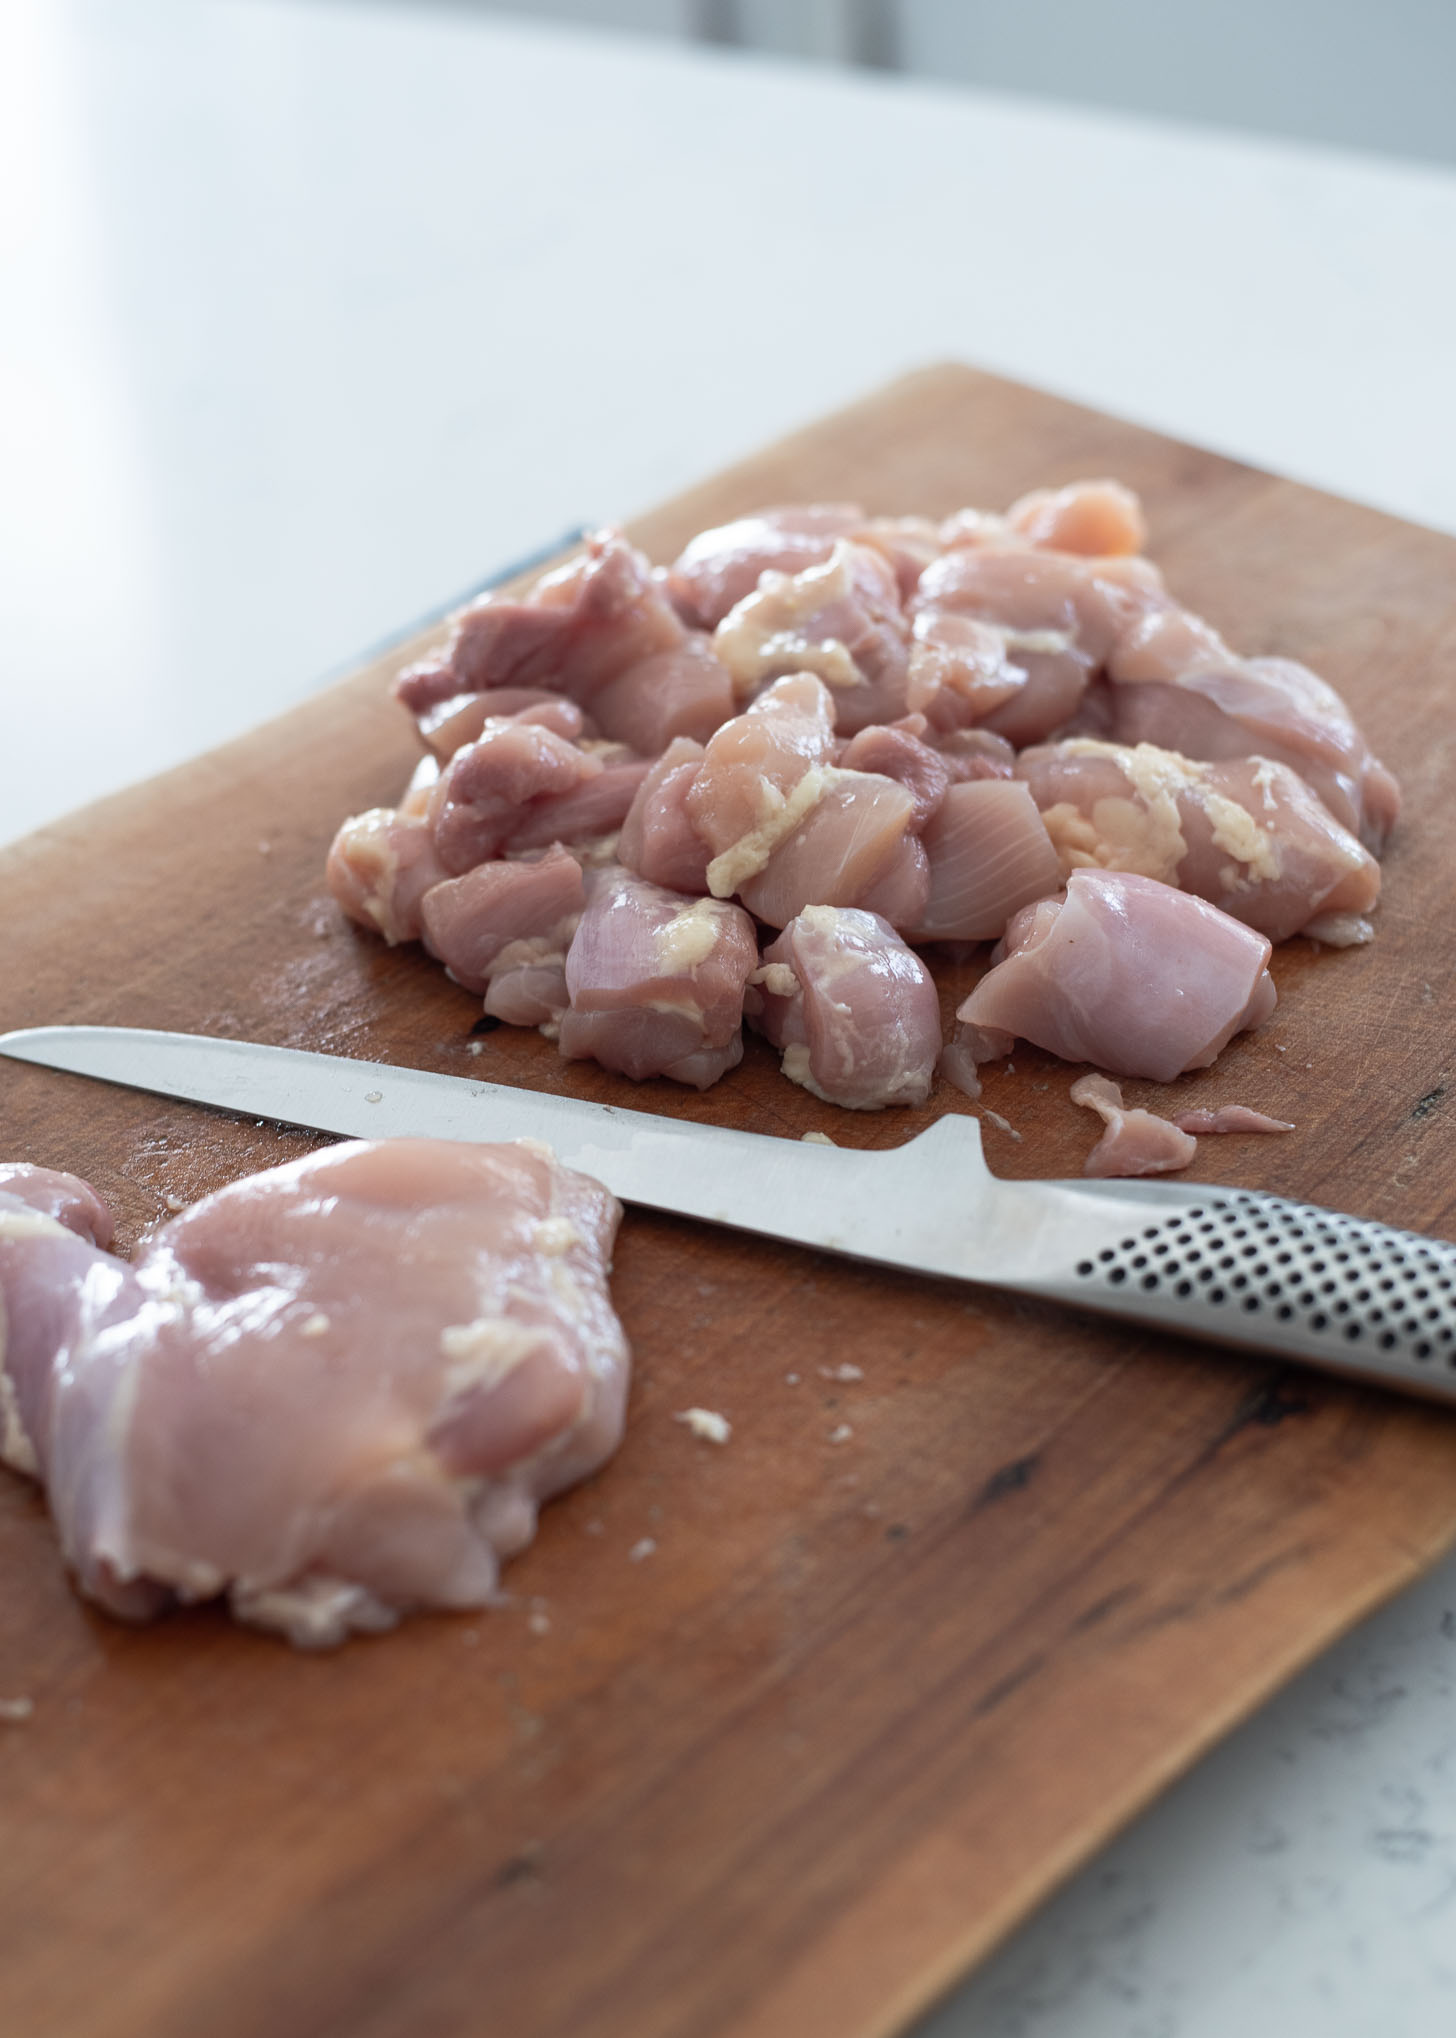 Chicken thigh is diced into small pieces.